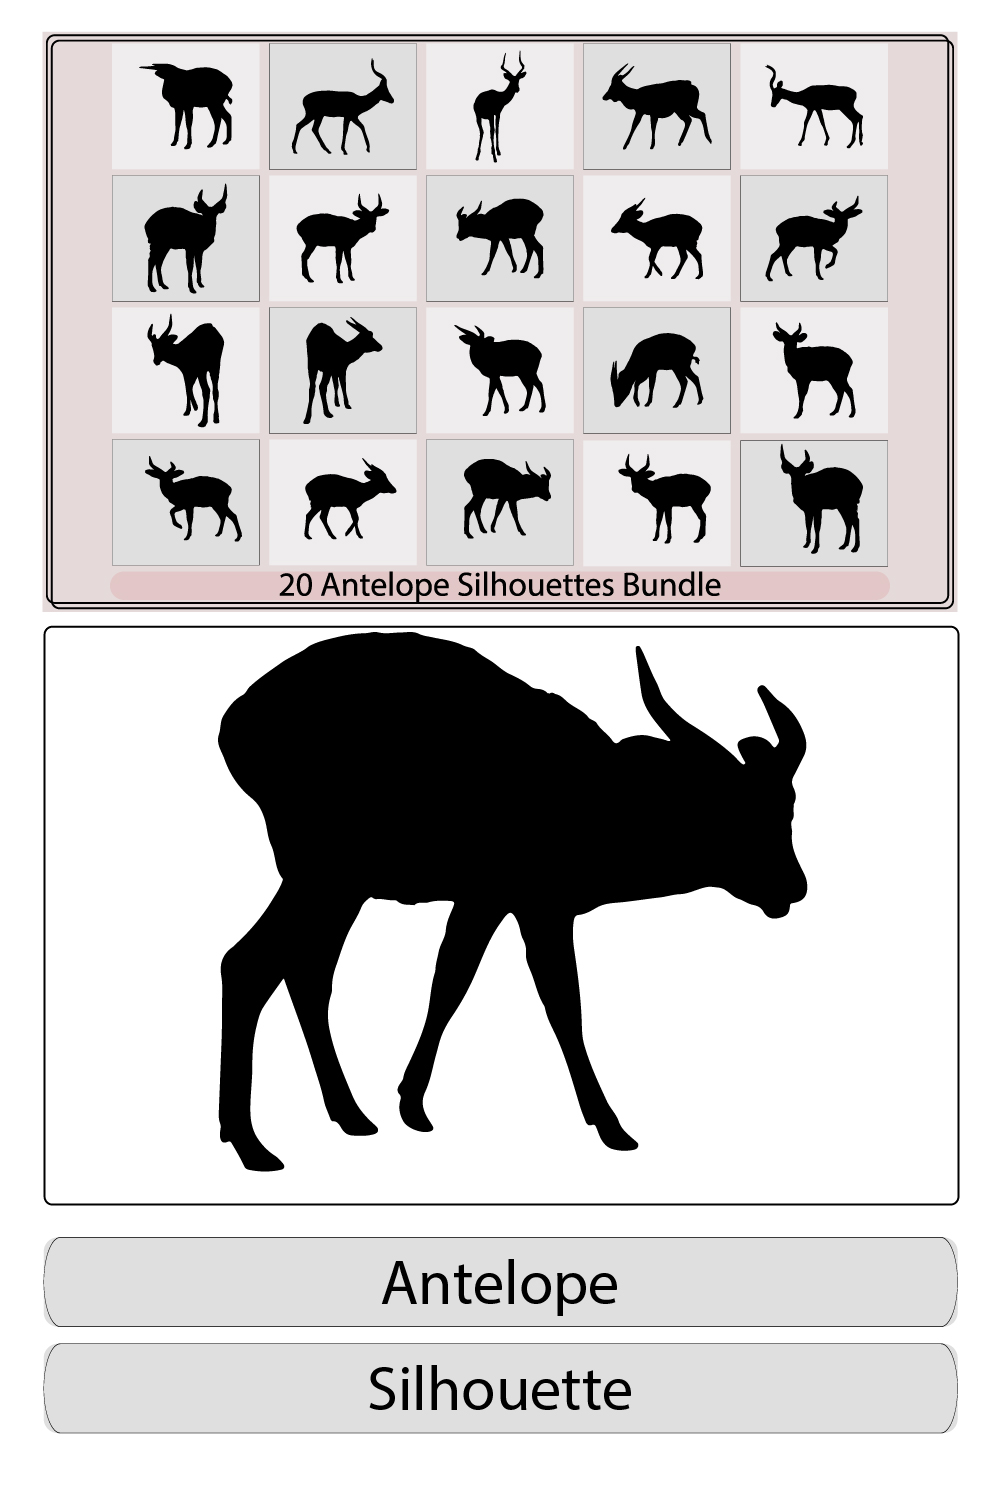 African antelope silhouette,Vector jump antelope silhouette,Black silhouette of an antelope,silhouettes of running impala antelopes, pinterest preview image.